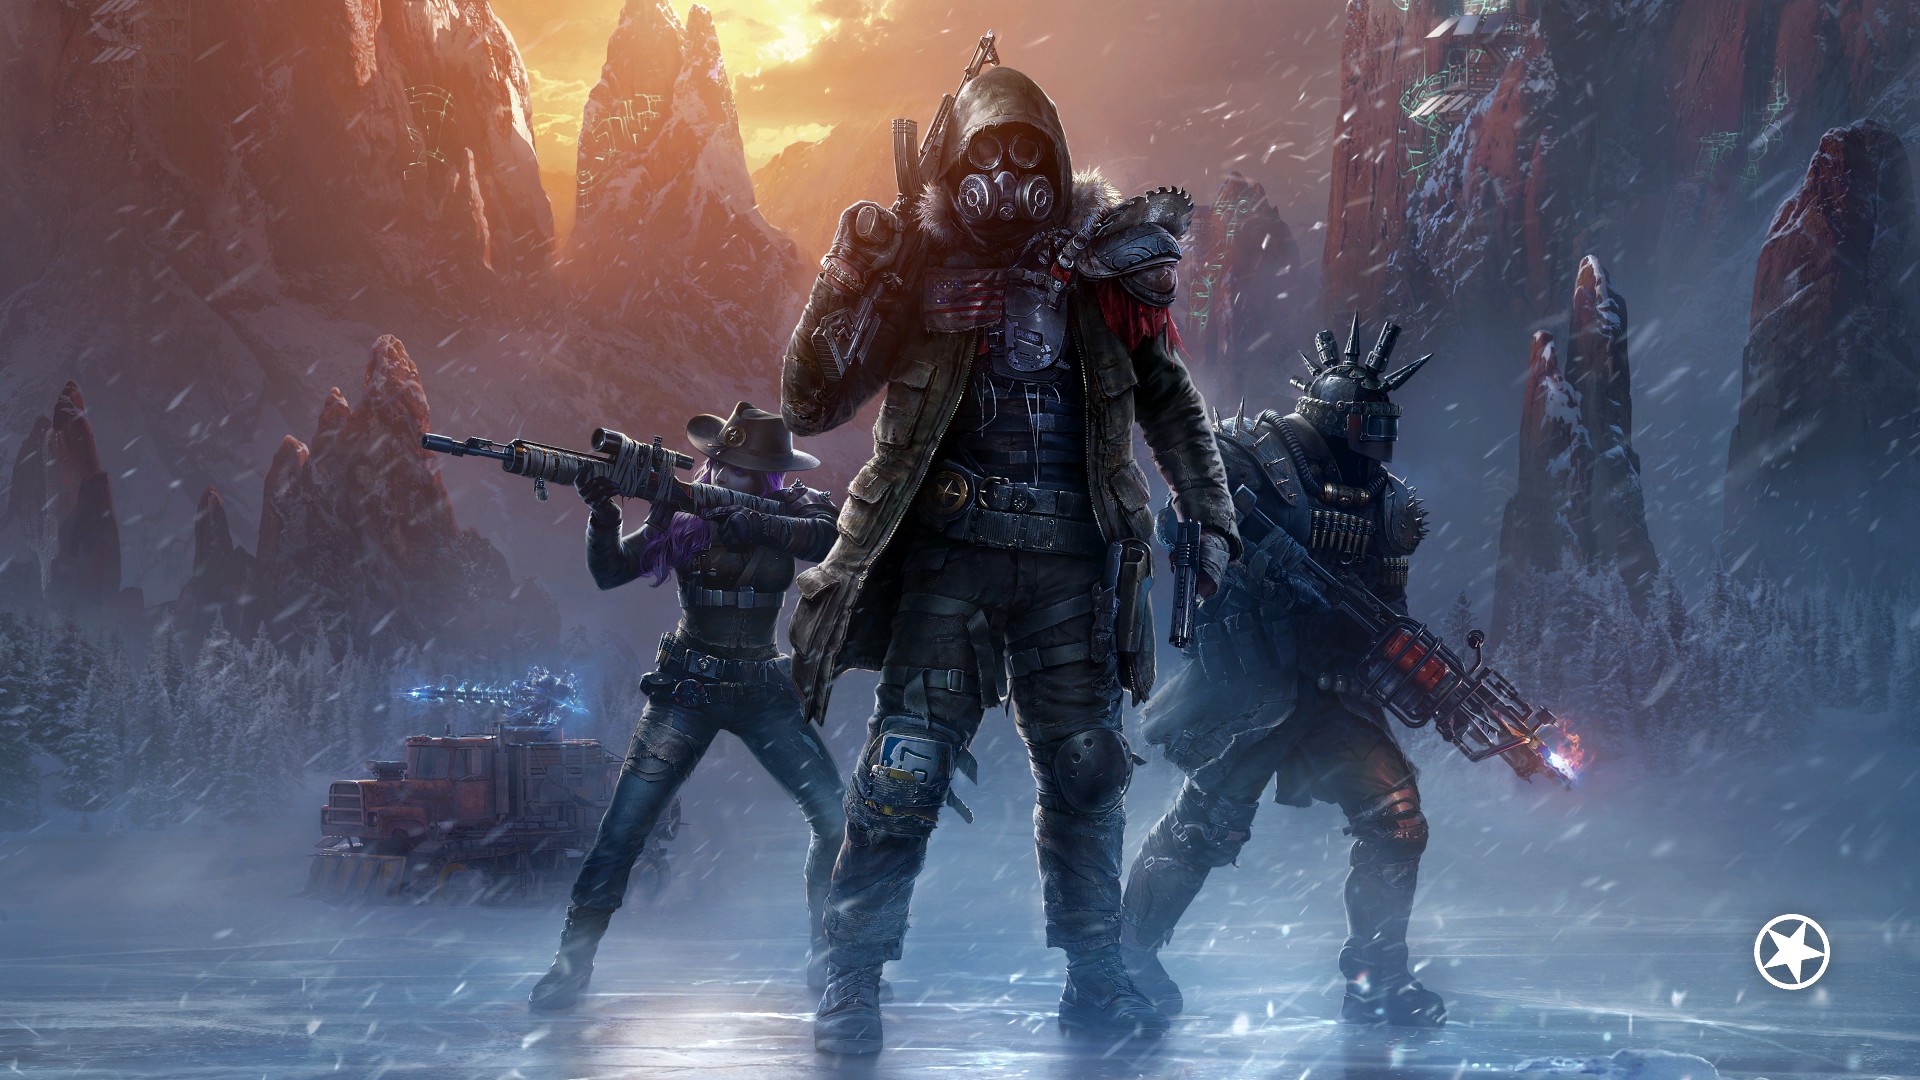  Wasteland 3 load times reduced by 'up to 60%', inXile say 